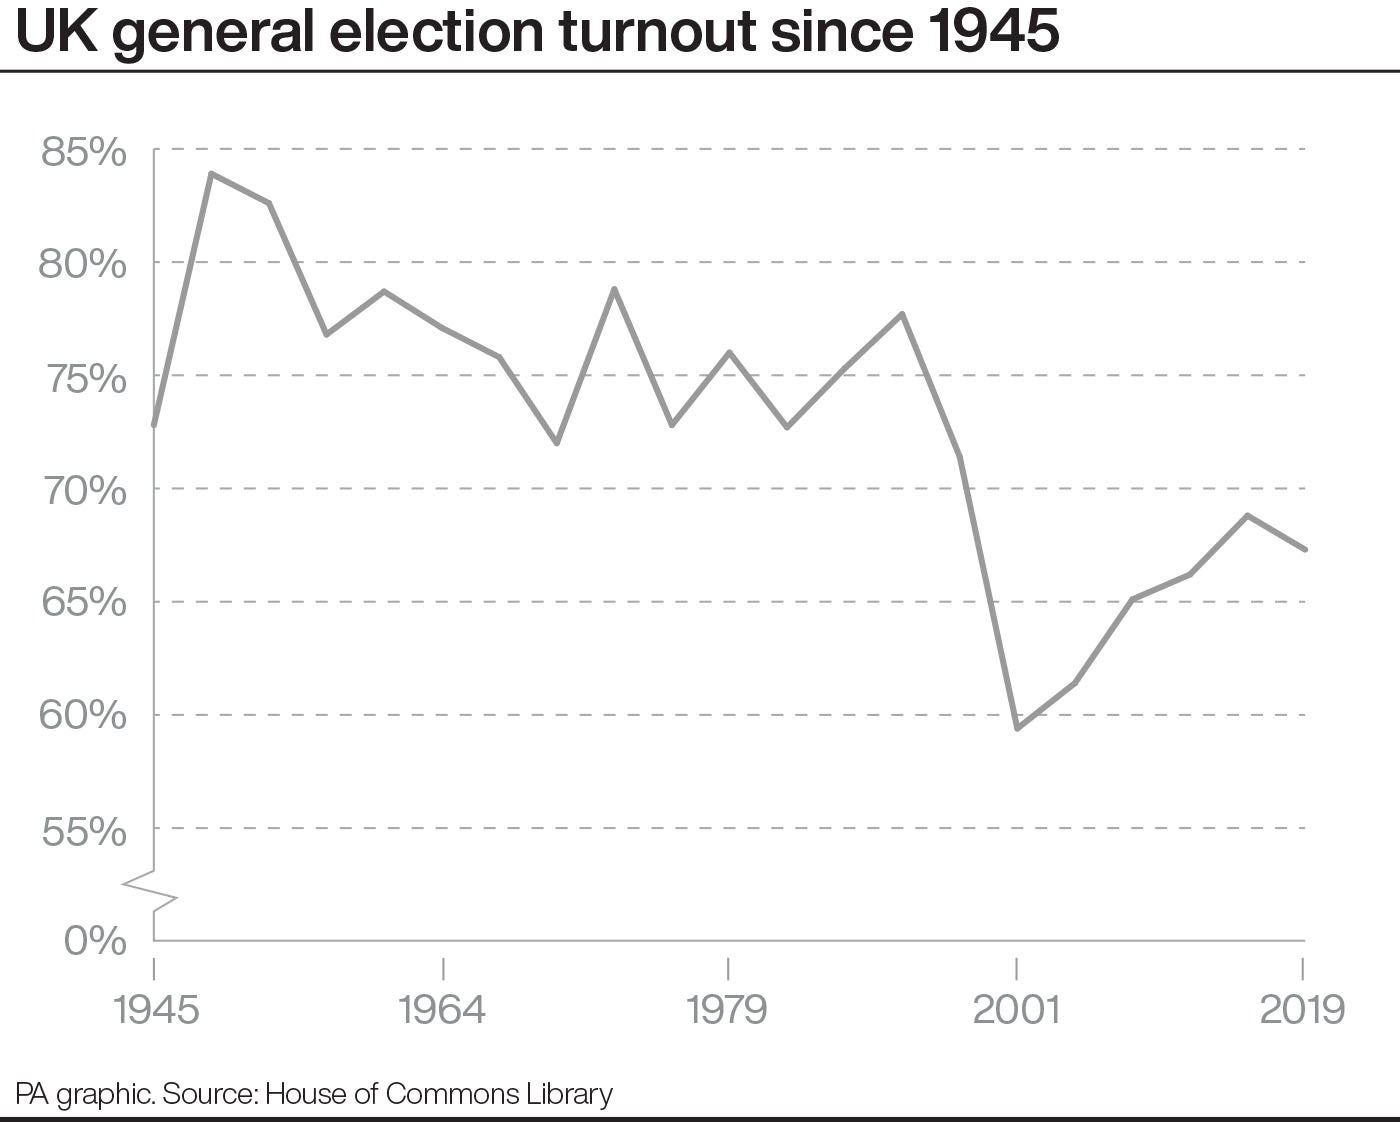 Turnout at UK general elections since 1945 (PA Graphics)